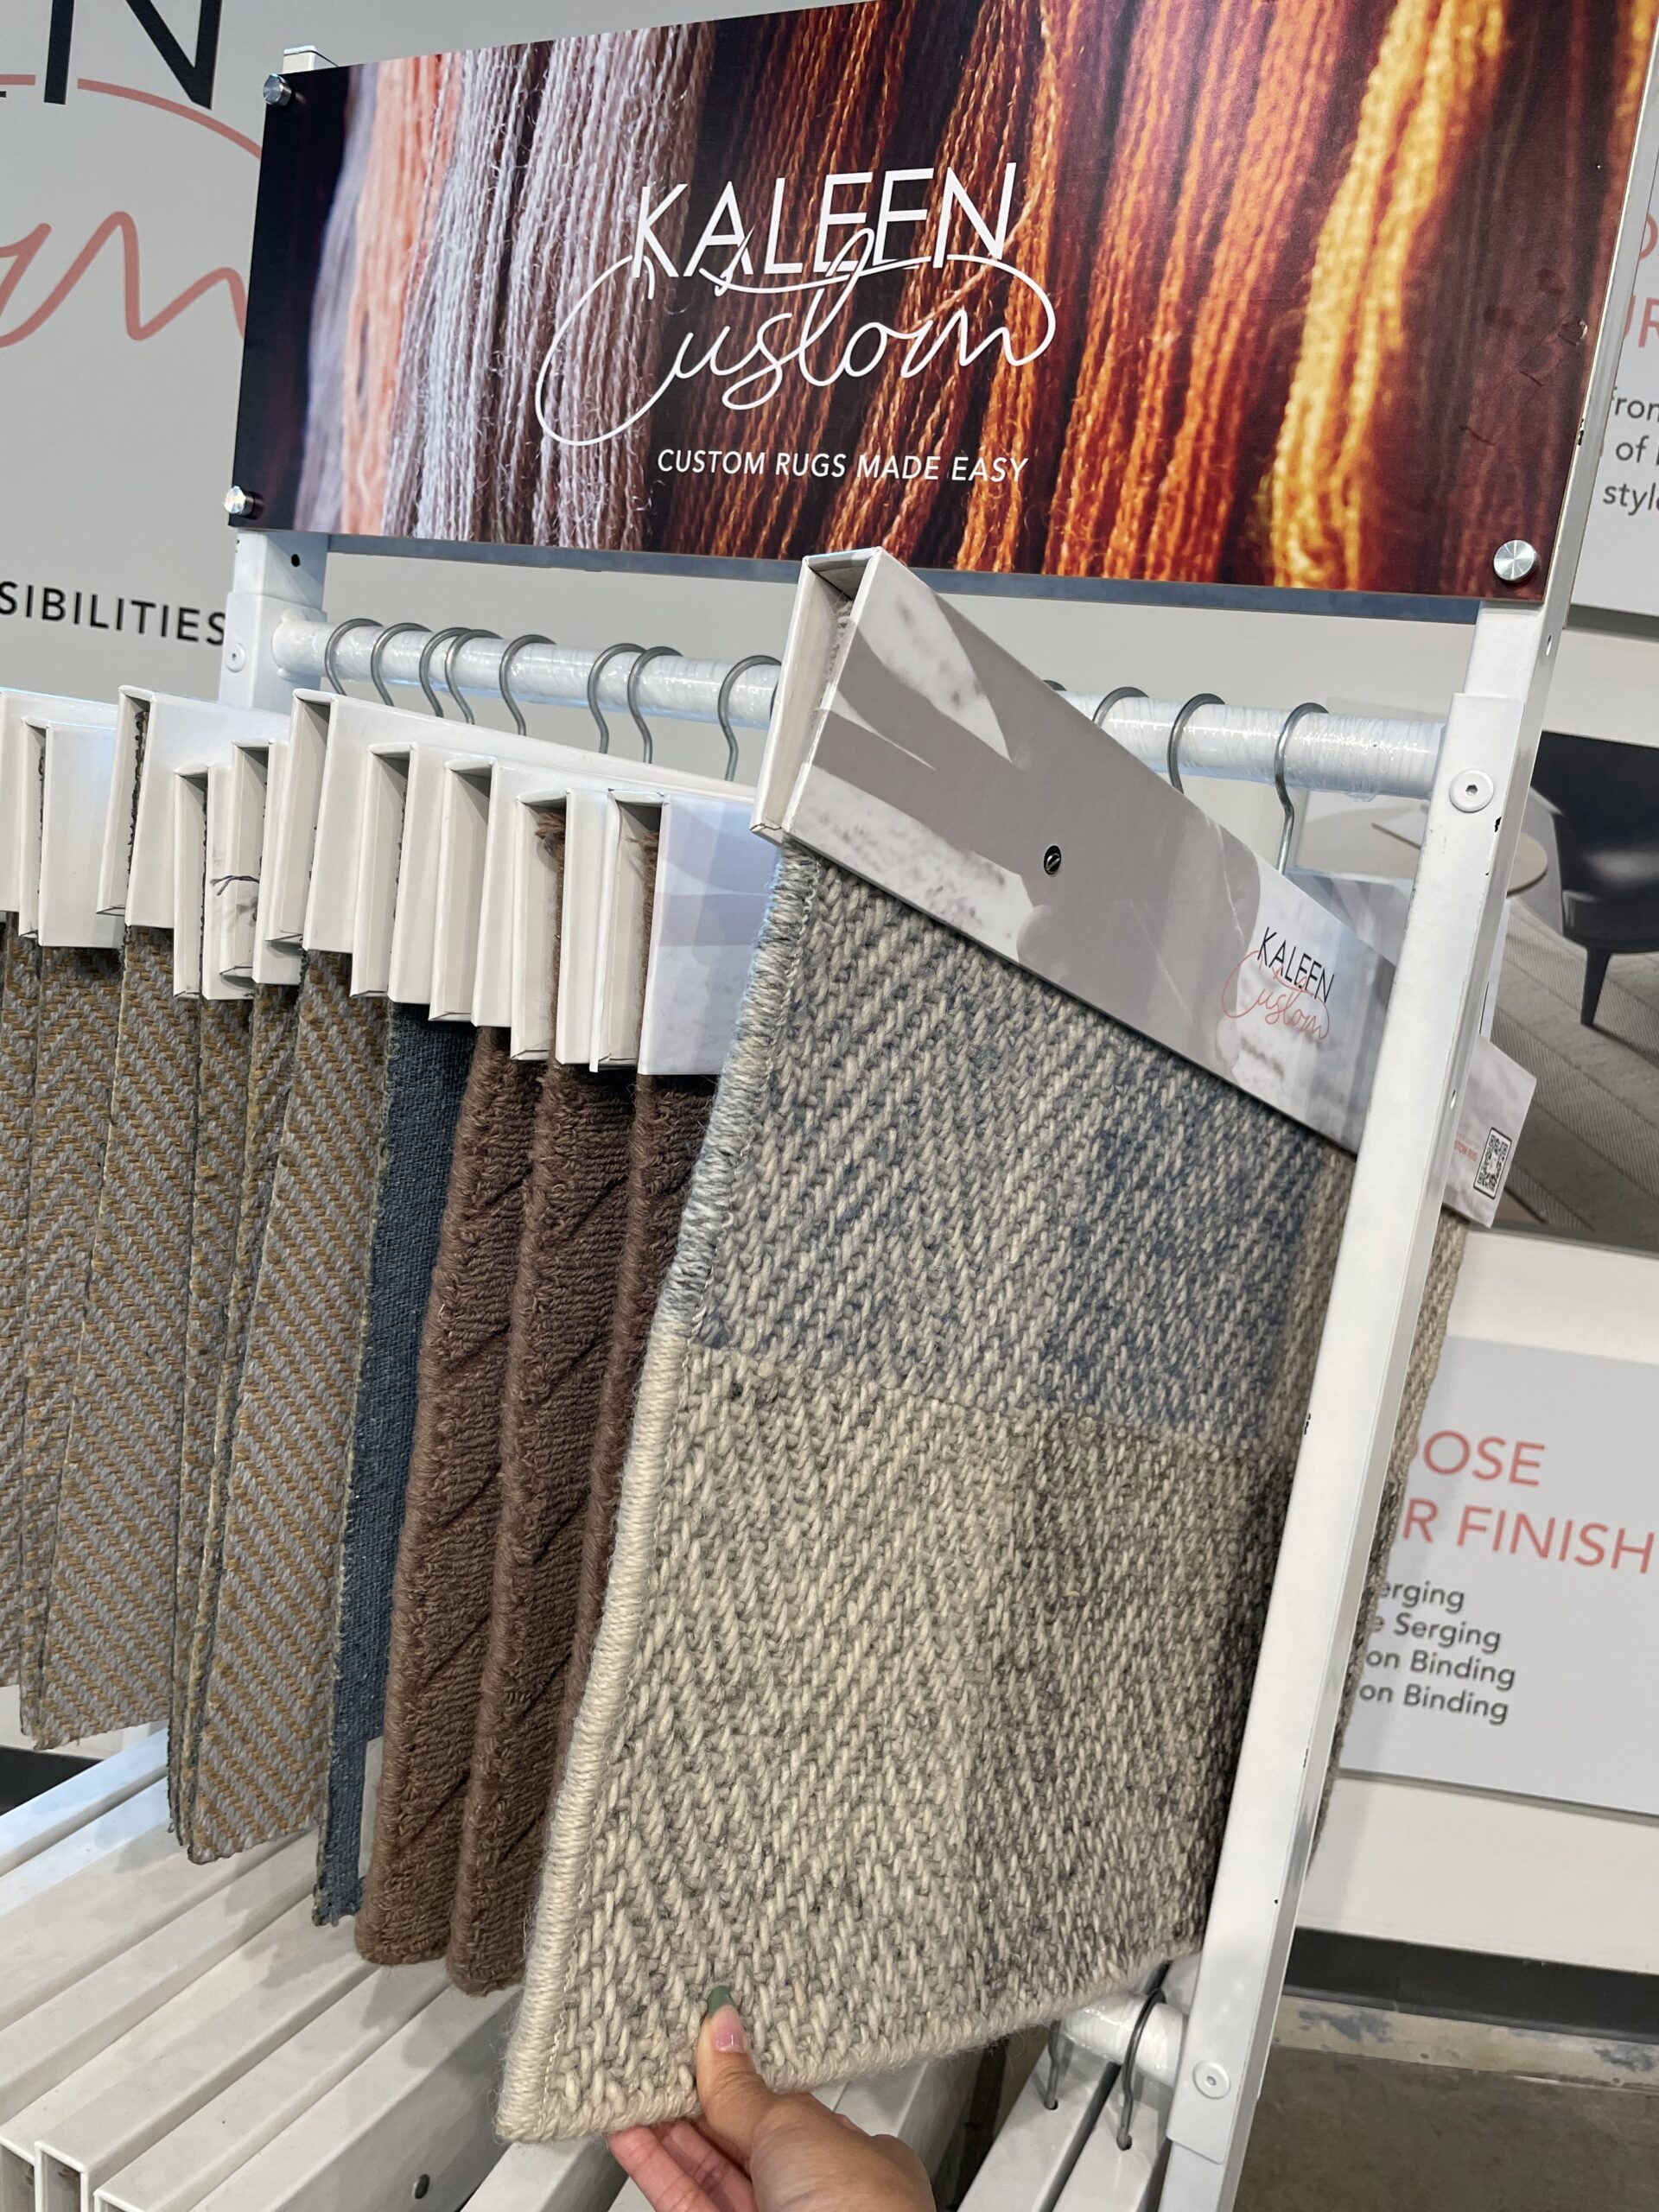 KALEEN Cuts Lead Times to 7-10 Business Days for Custom Area Rugs from Broadloom